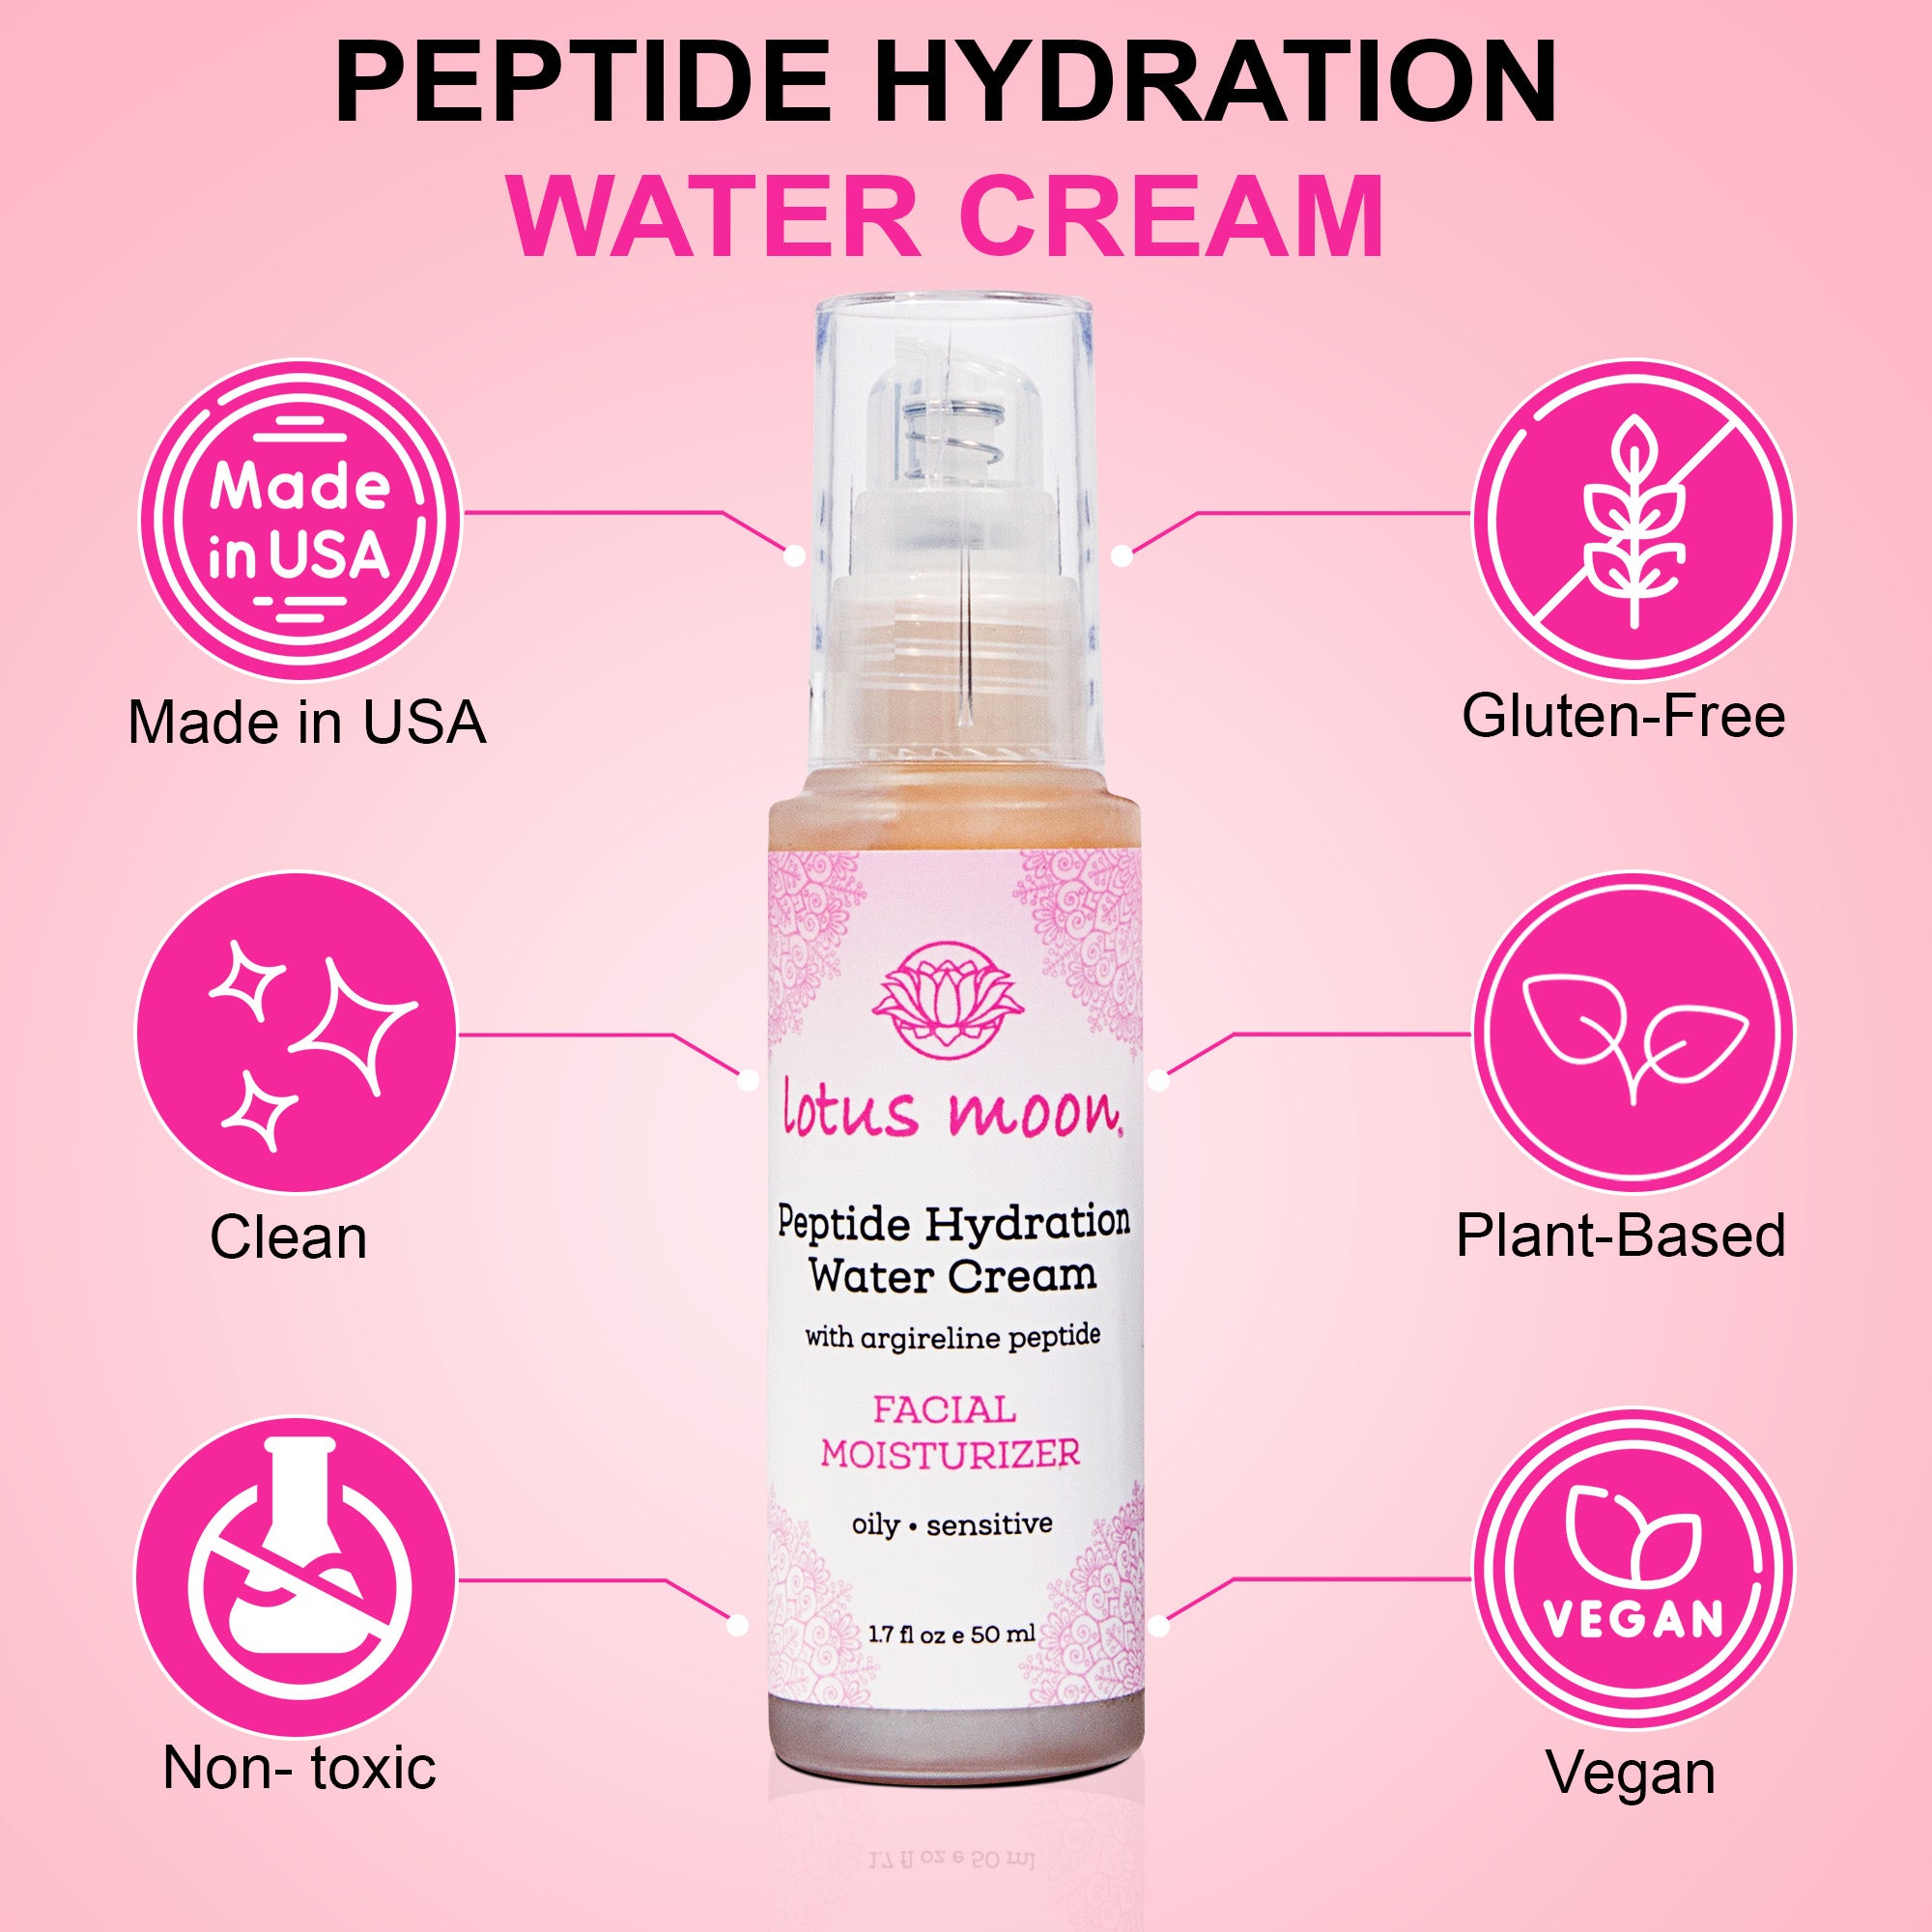 Peptide Hydration Water Cream (formerly High Potency)